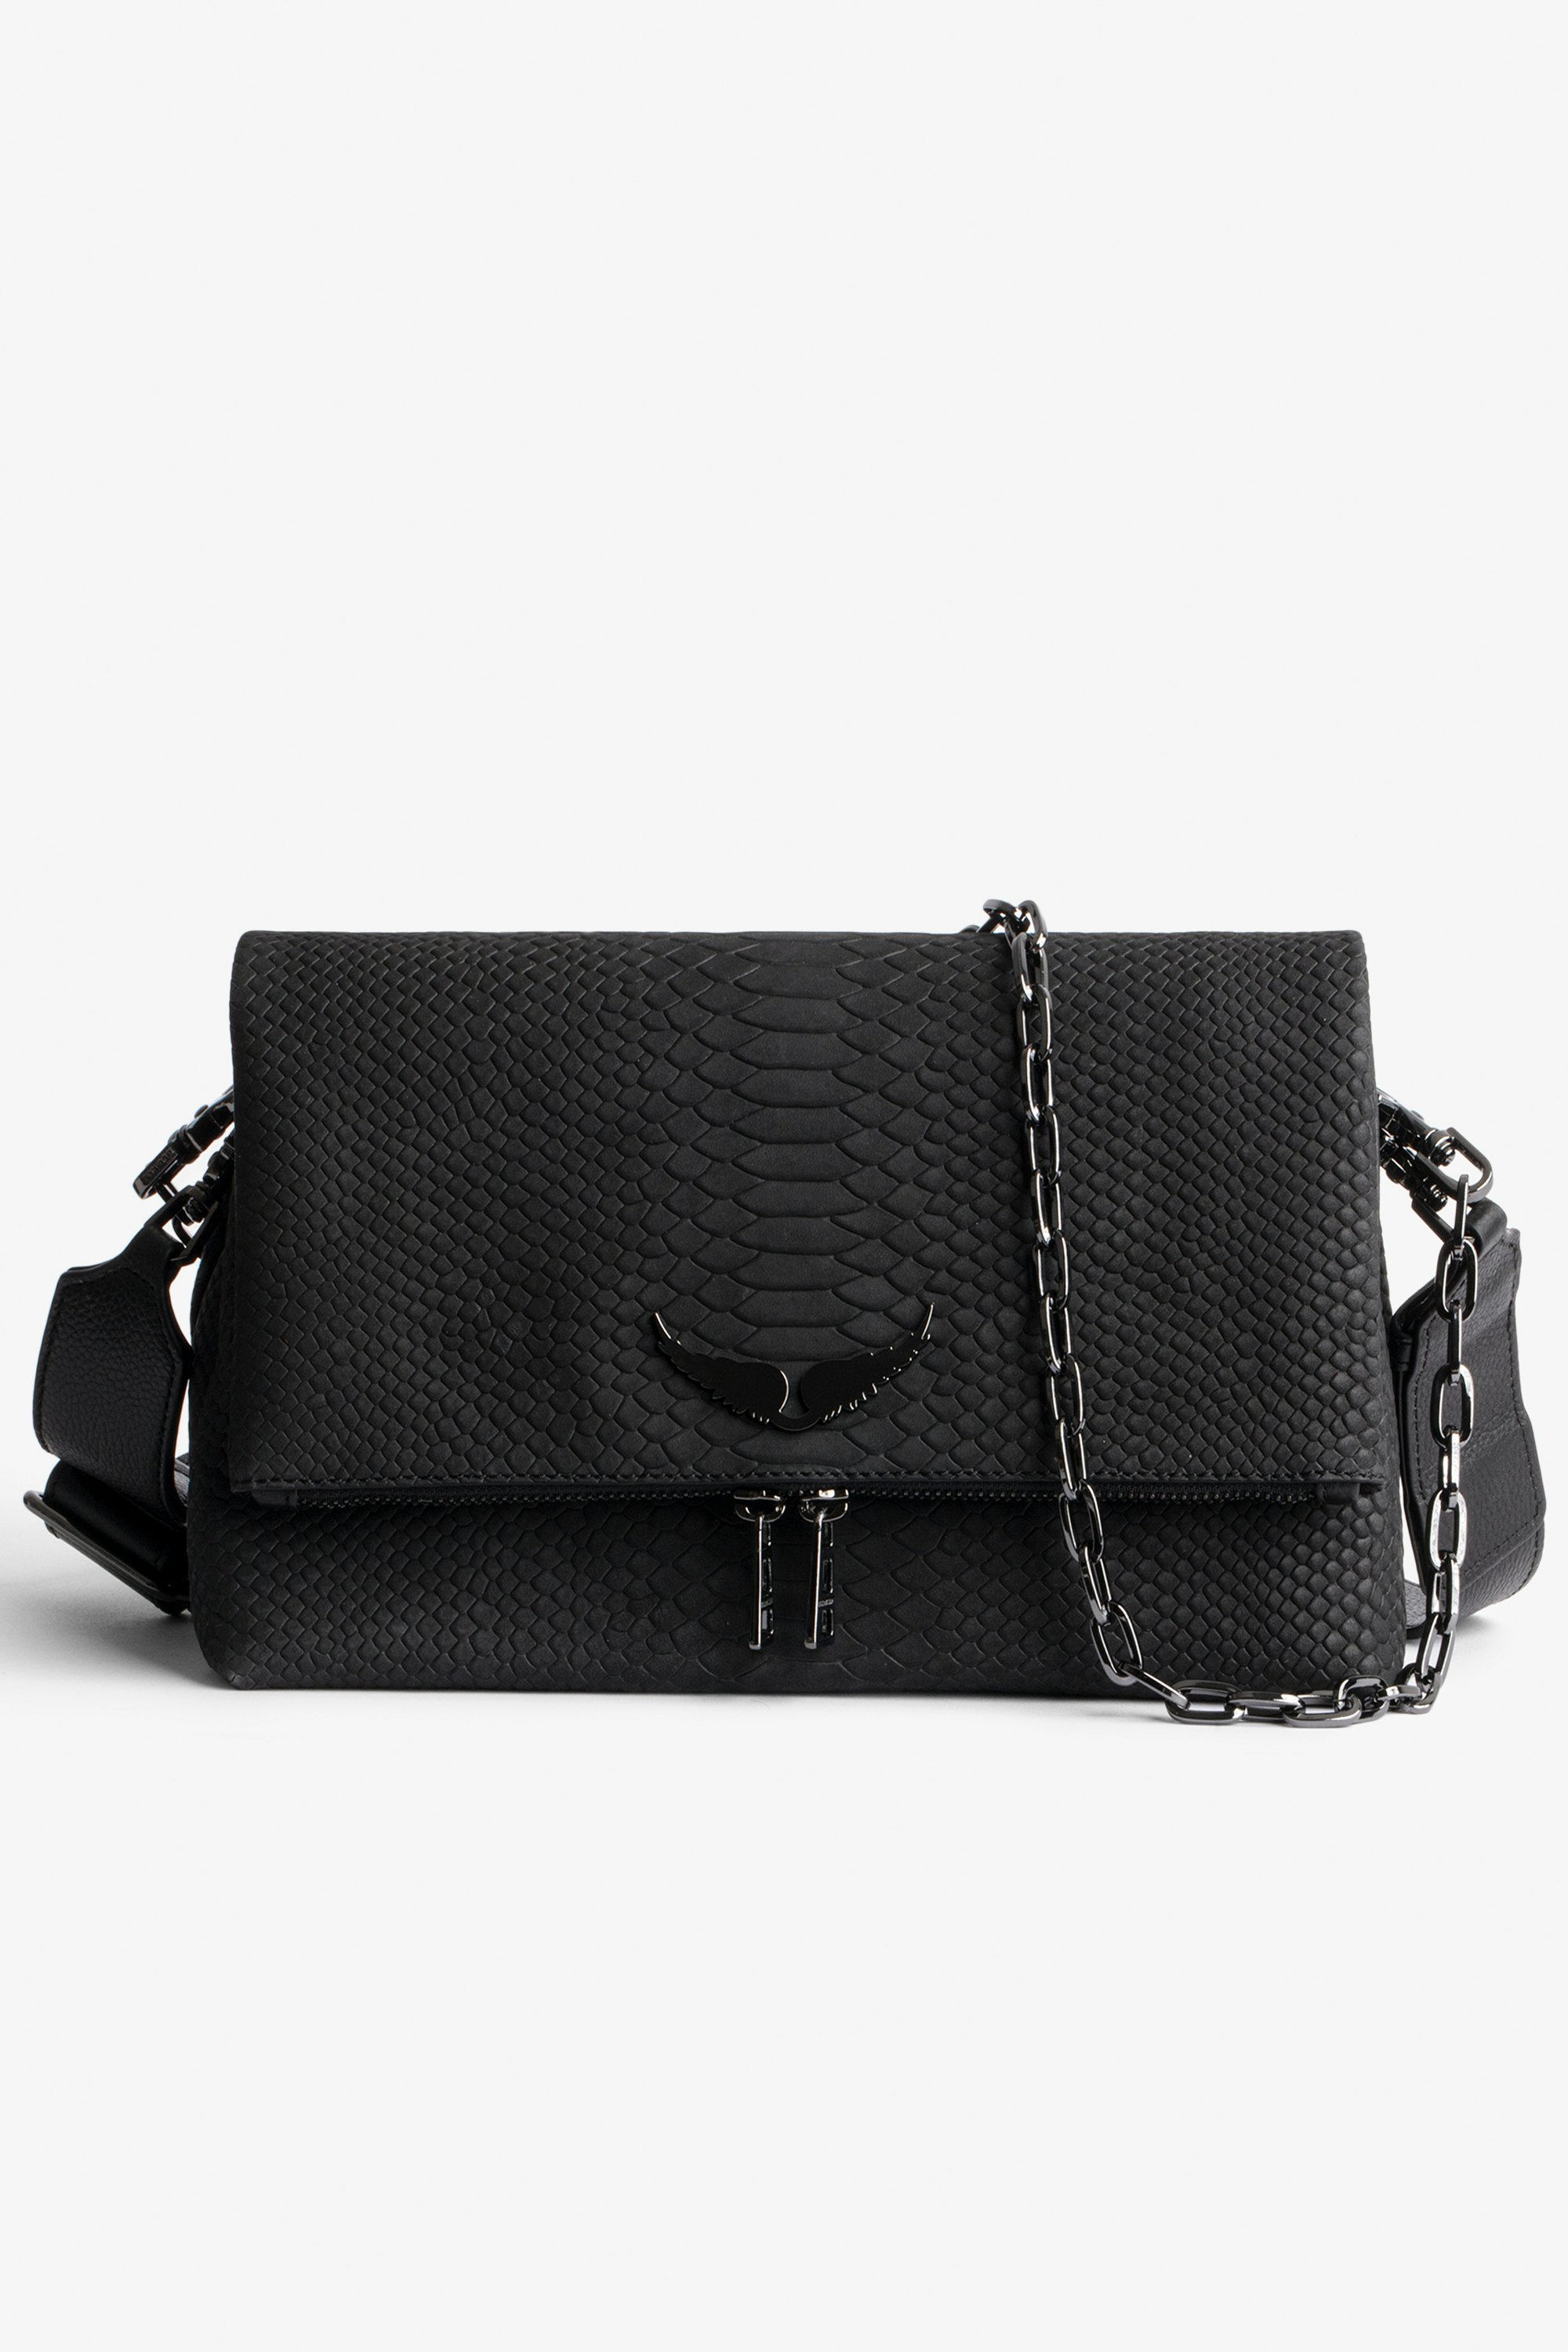 Rocky Bag Women’s bag in black python-effect leather with a chain shoulder strap